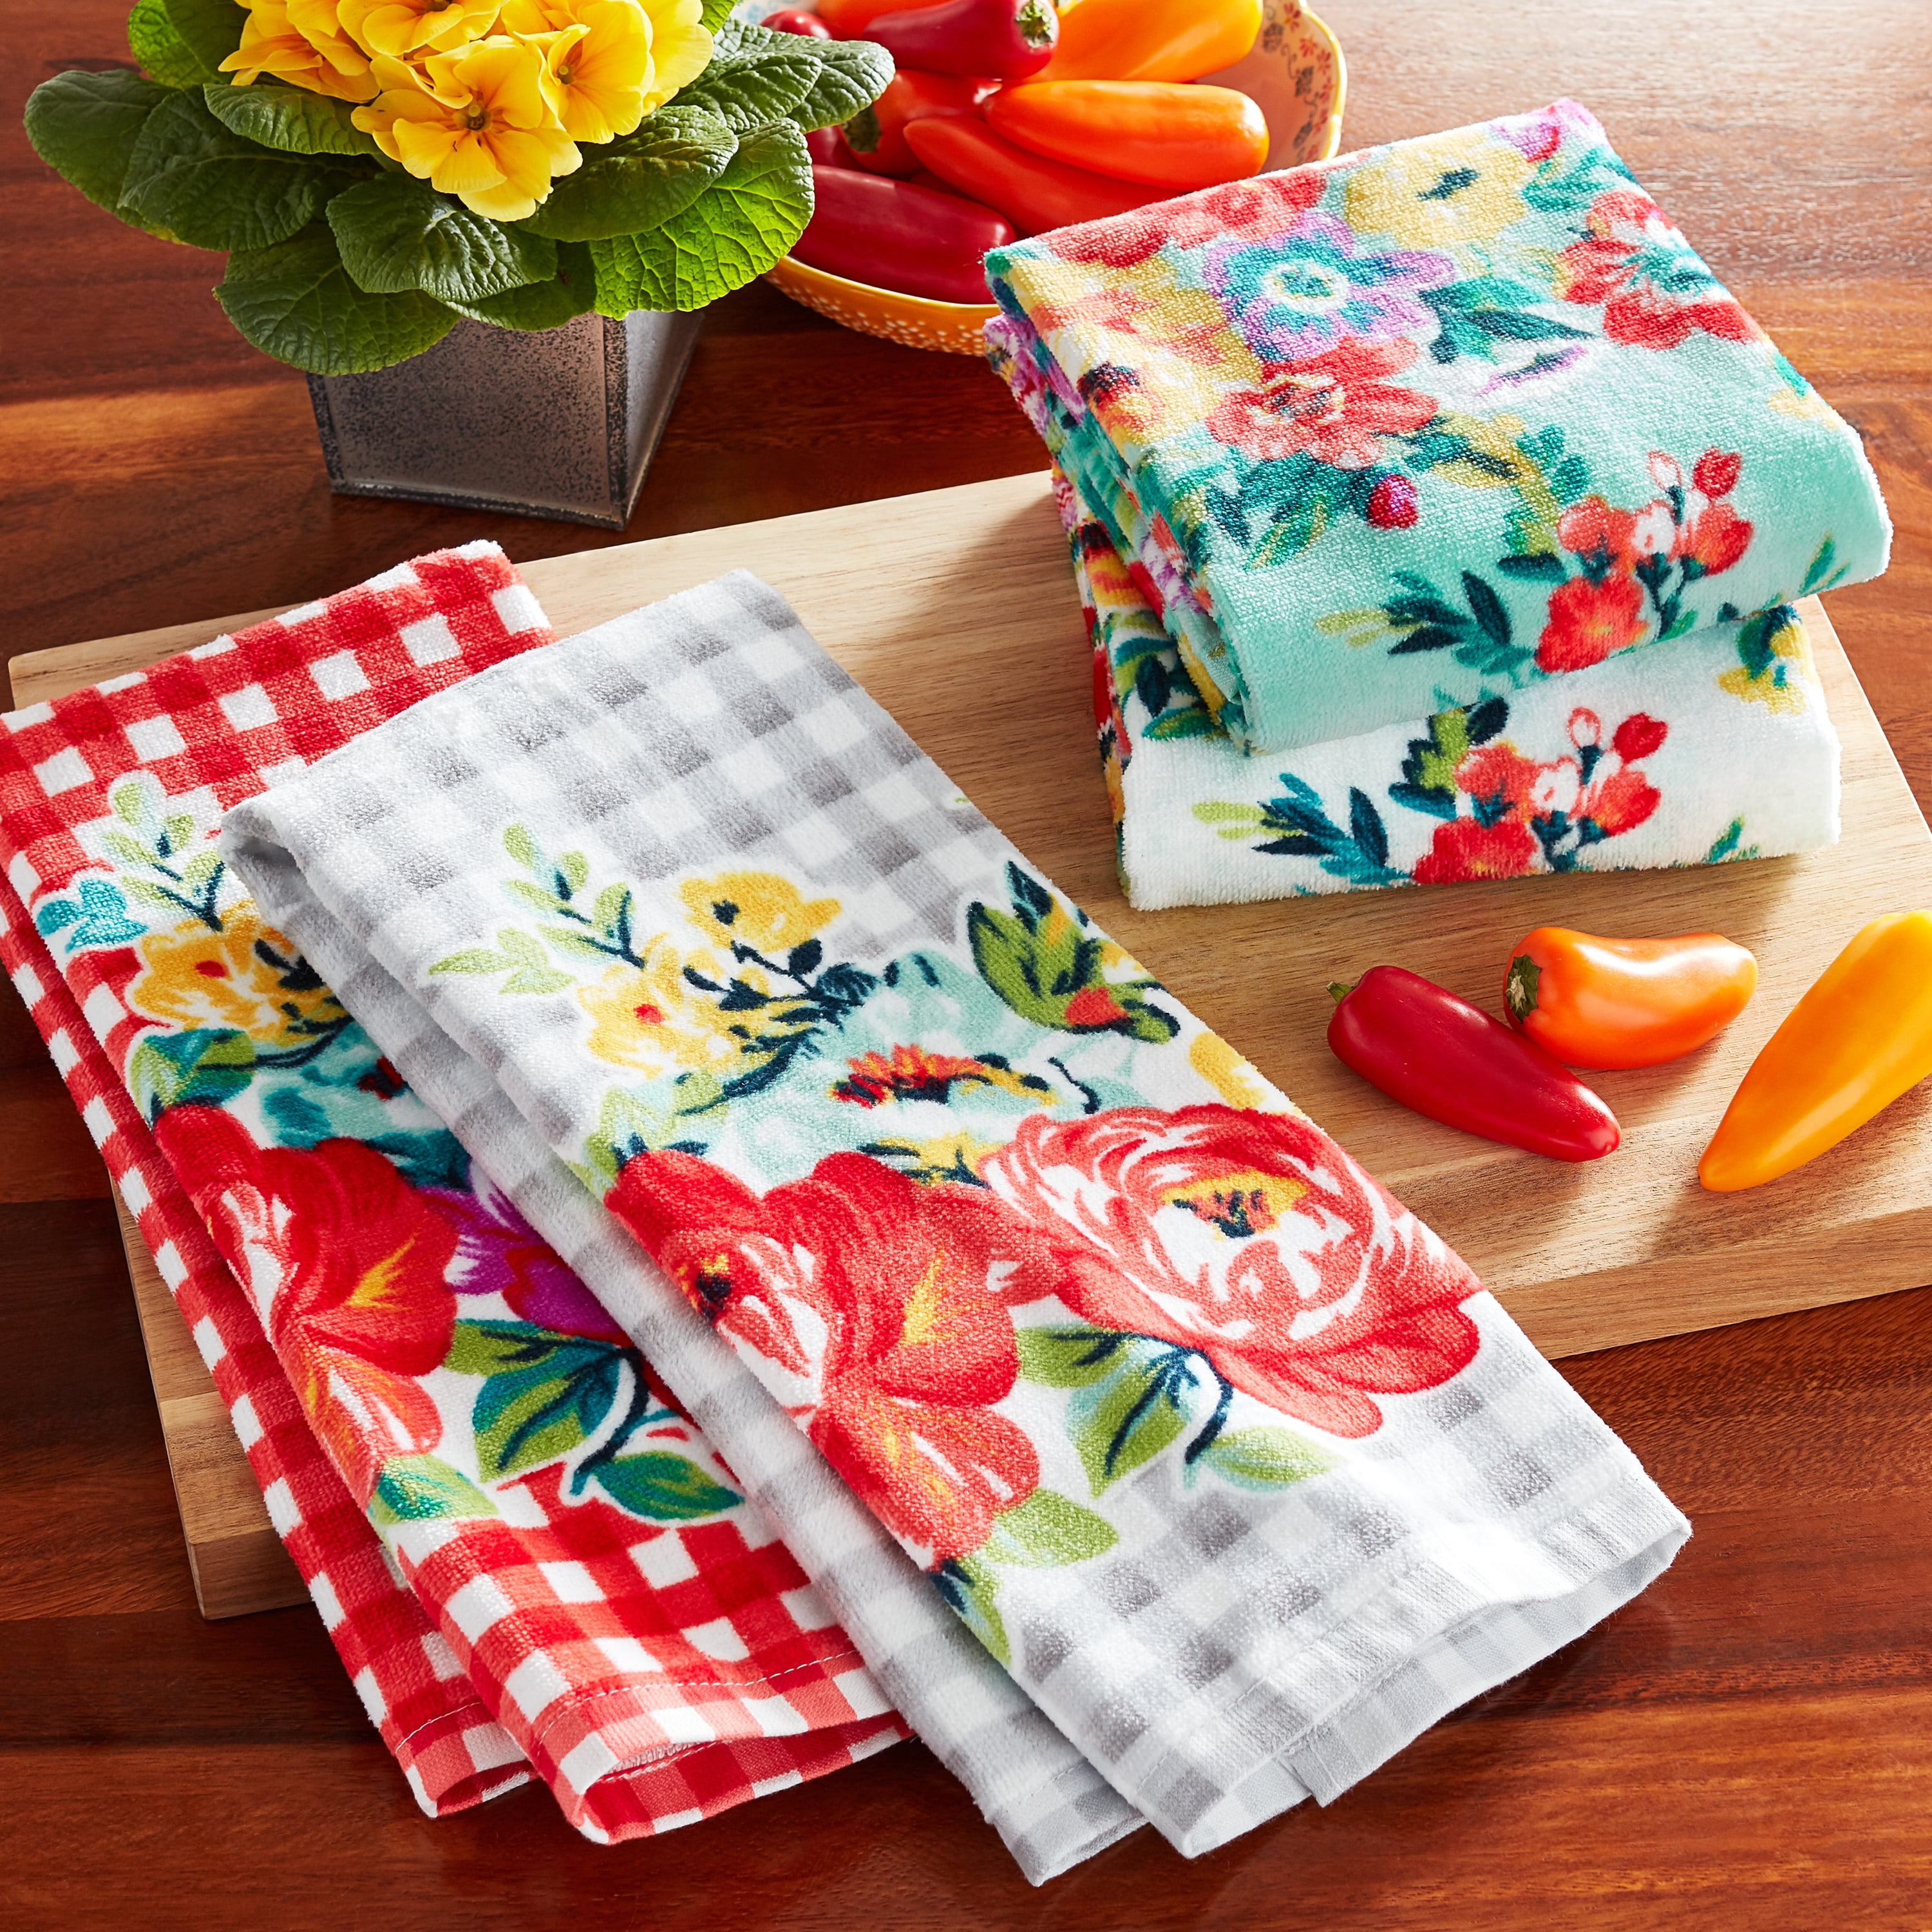 Set of Three Colorful Cotton Dish Towels with Printed Motifs, 'Sweet  Happiness